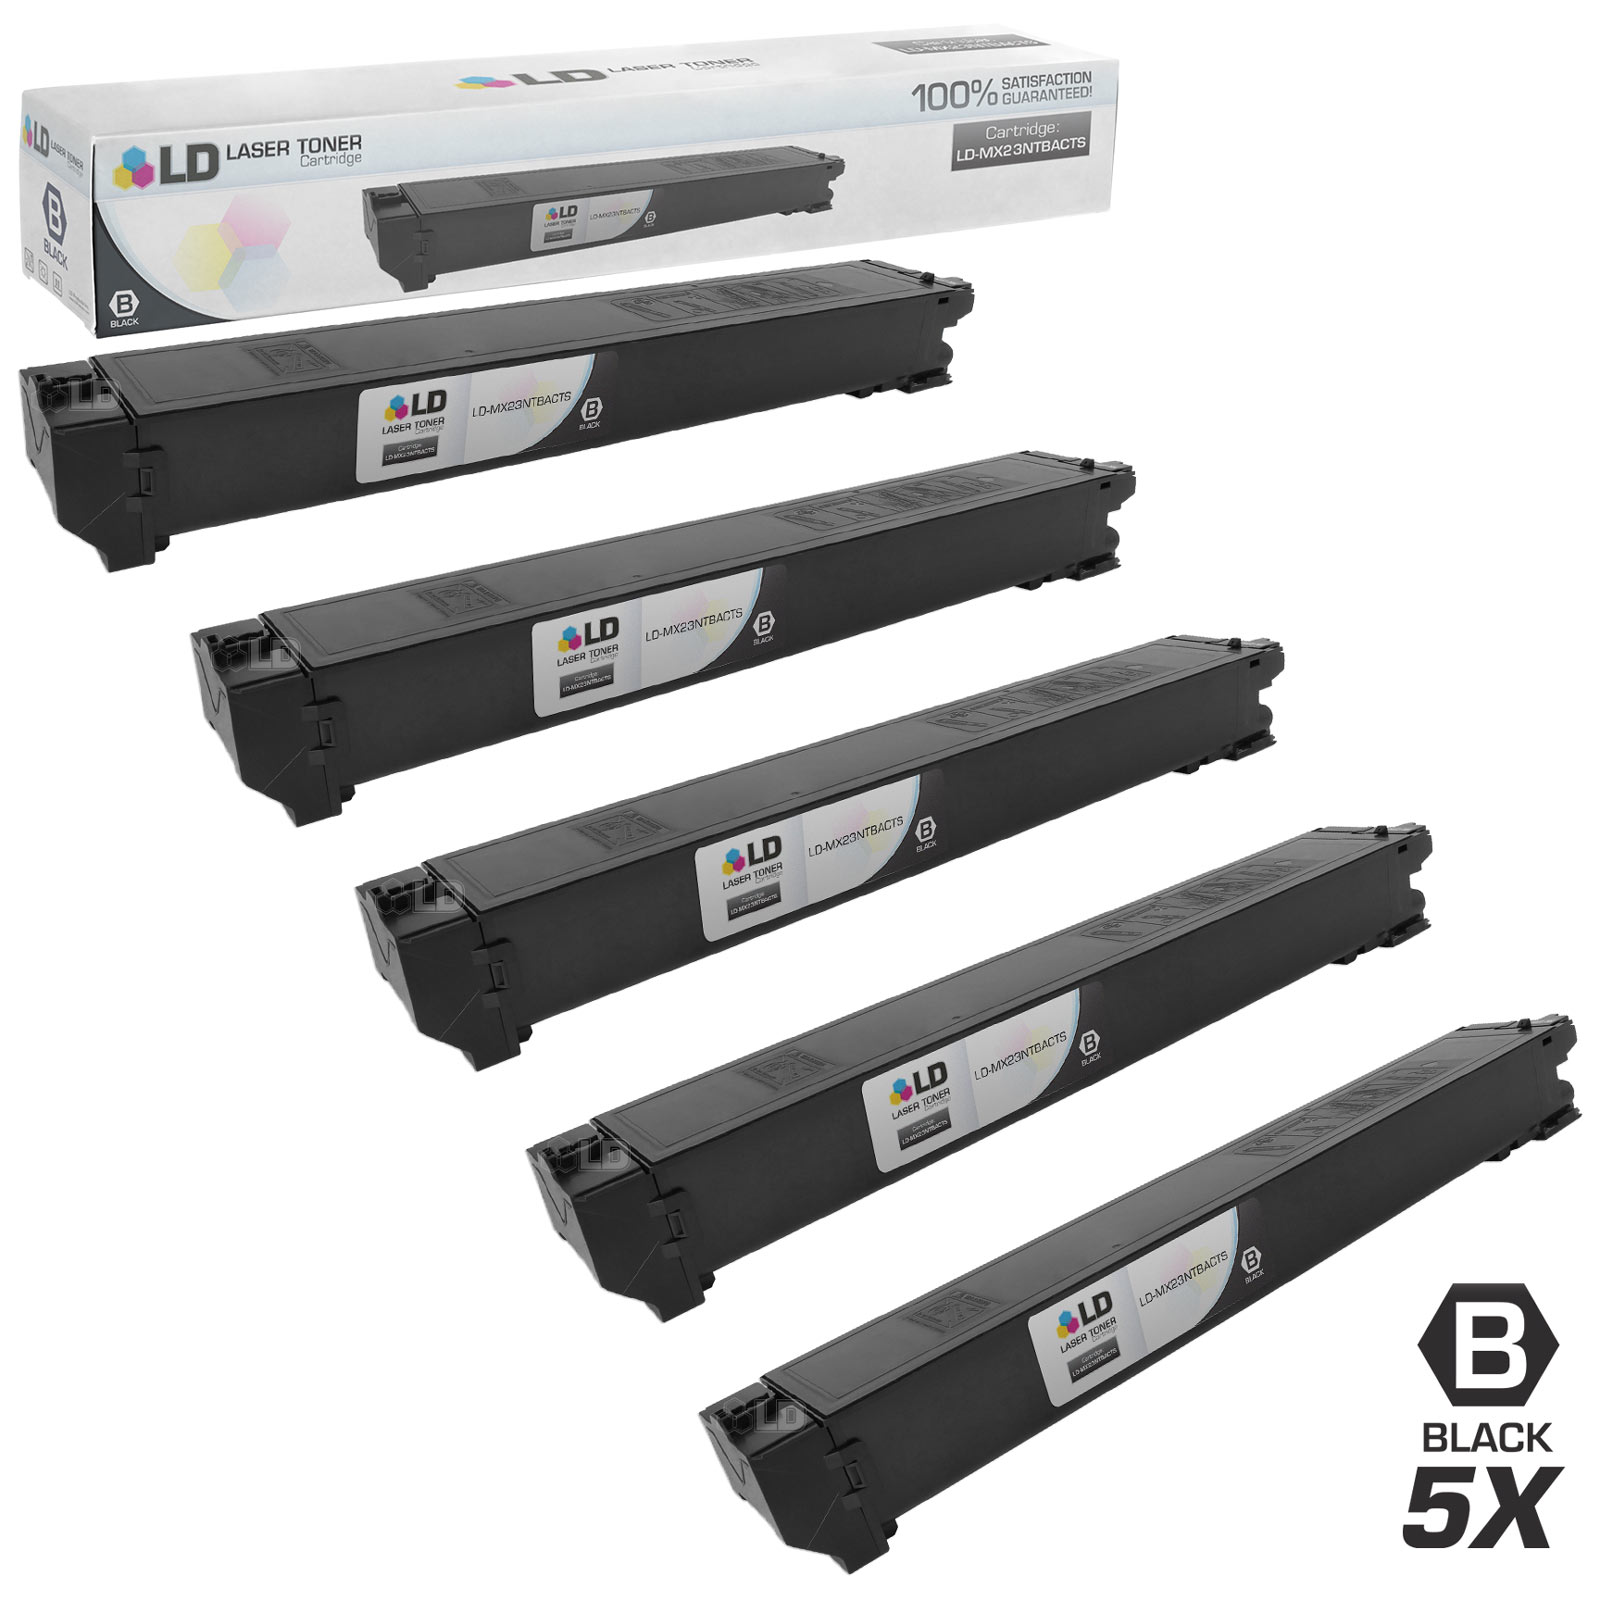 LD Compatible Replacements for Sharp MX-23NTBA Set of 5 Black Laser Toner Cartridges for use in Sharp MX-2310U, MX-2616N, MX-3111U, and MX-3116N s - image 1 of 1